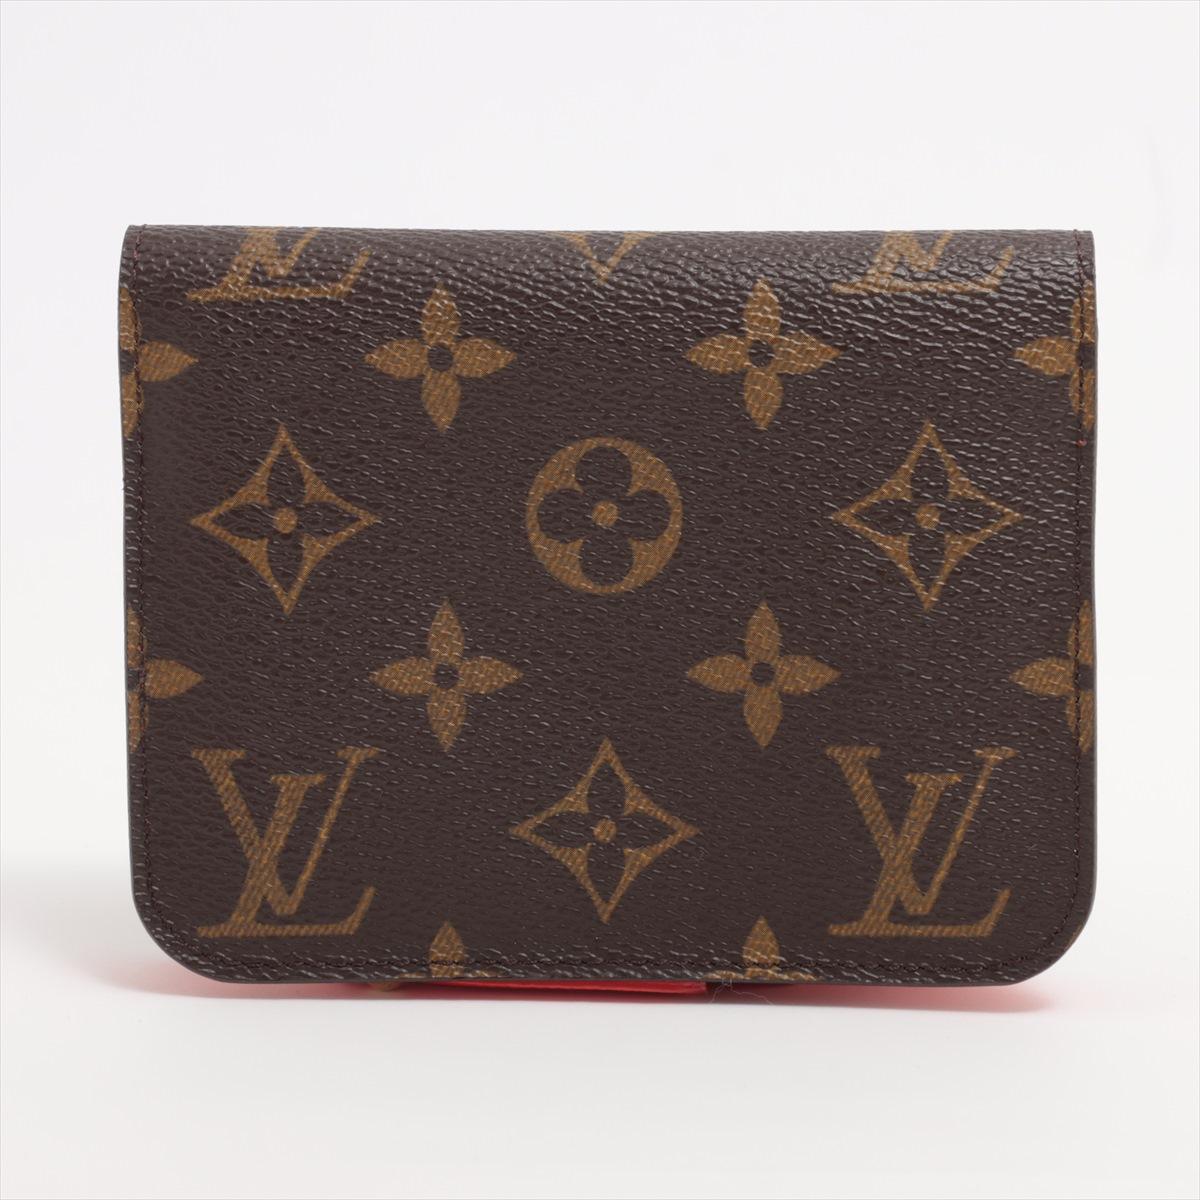 The Louis Vuitton Monogram Small Bi-fold Wallet in Orange is a stylish and compact accessory that exudes luxury and sophistication. Crafted from the brand's iconic Monogram canvas, the wallet features a vibrant orange hue that adds a pop of color to